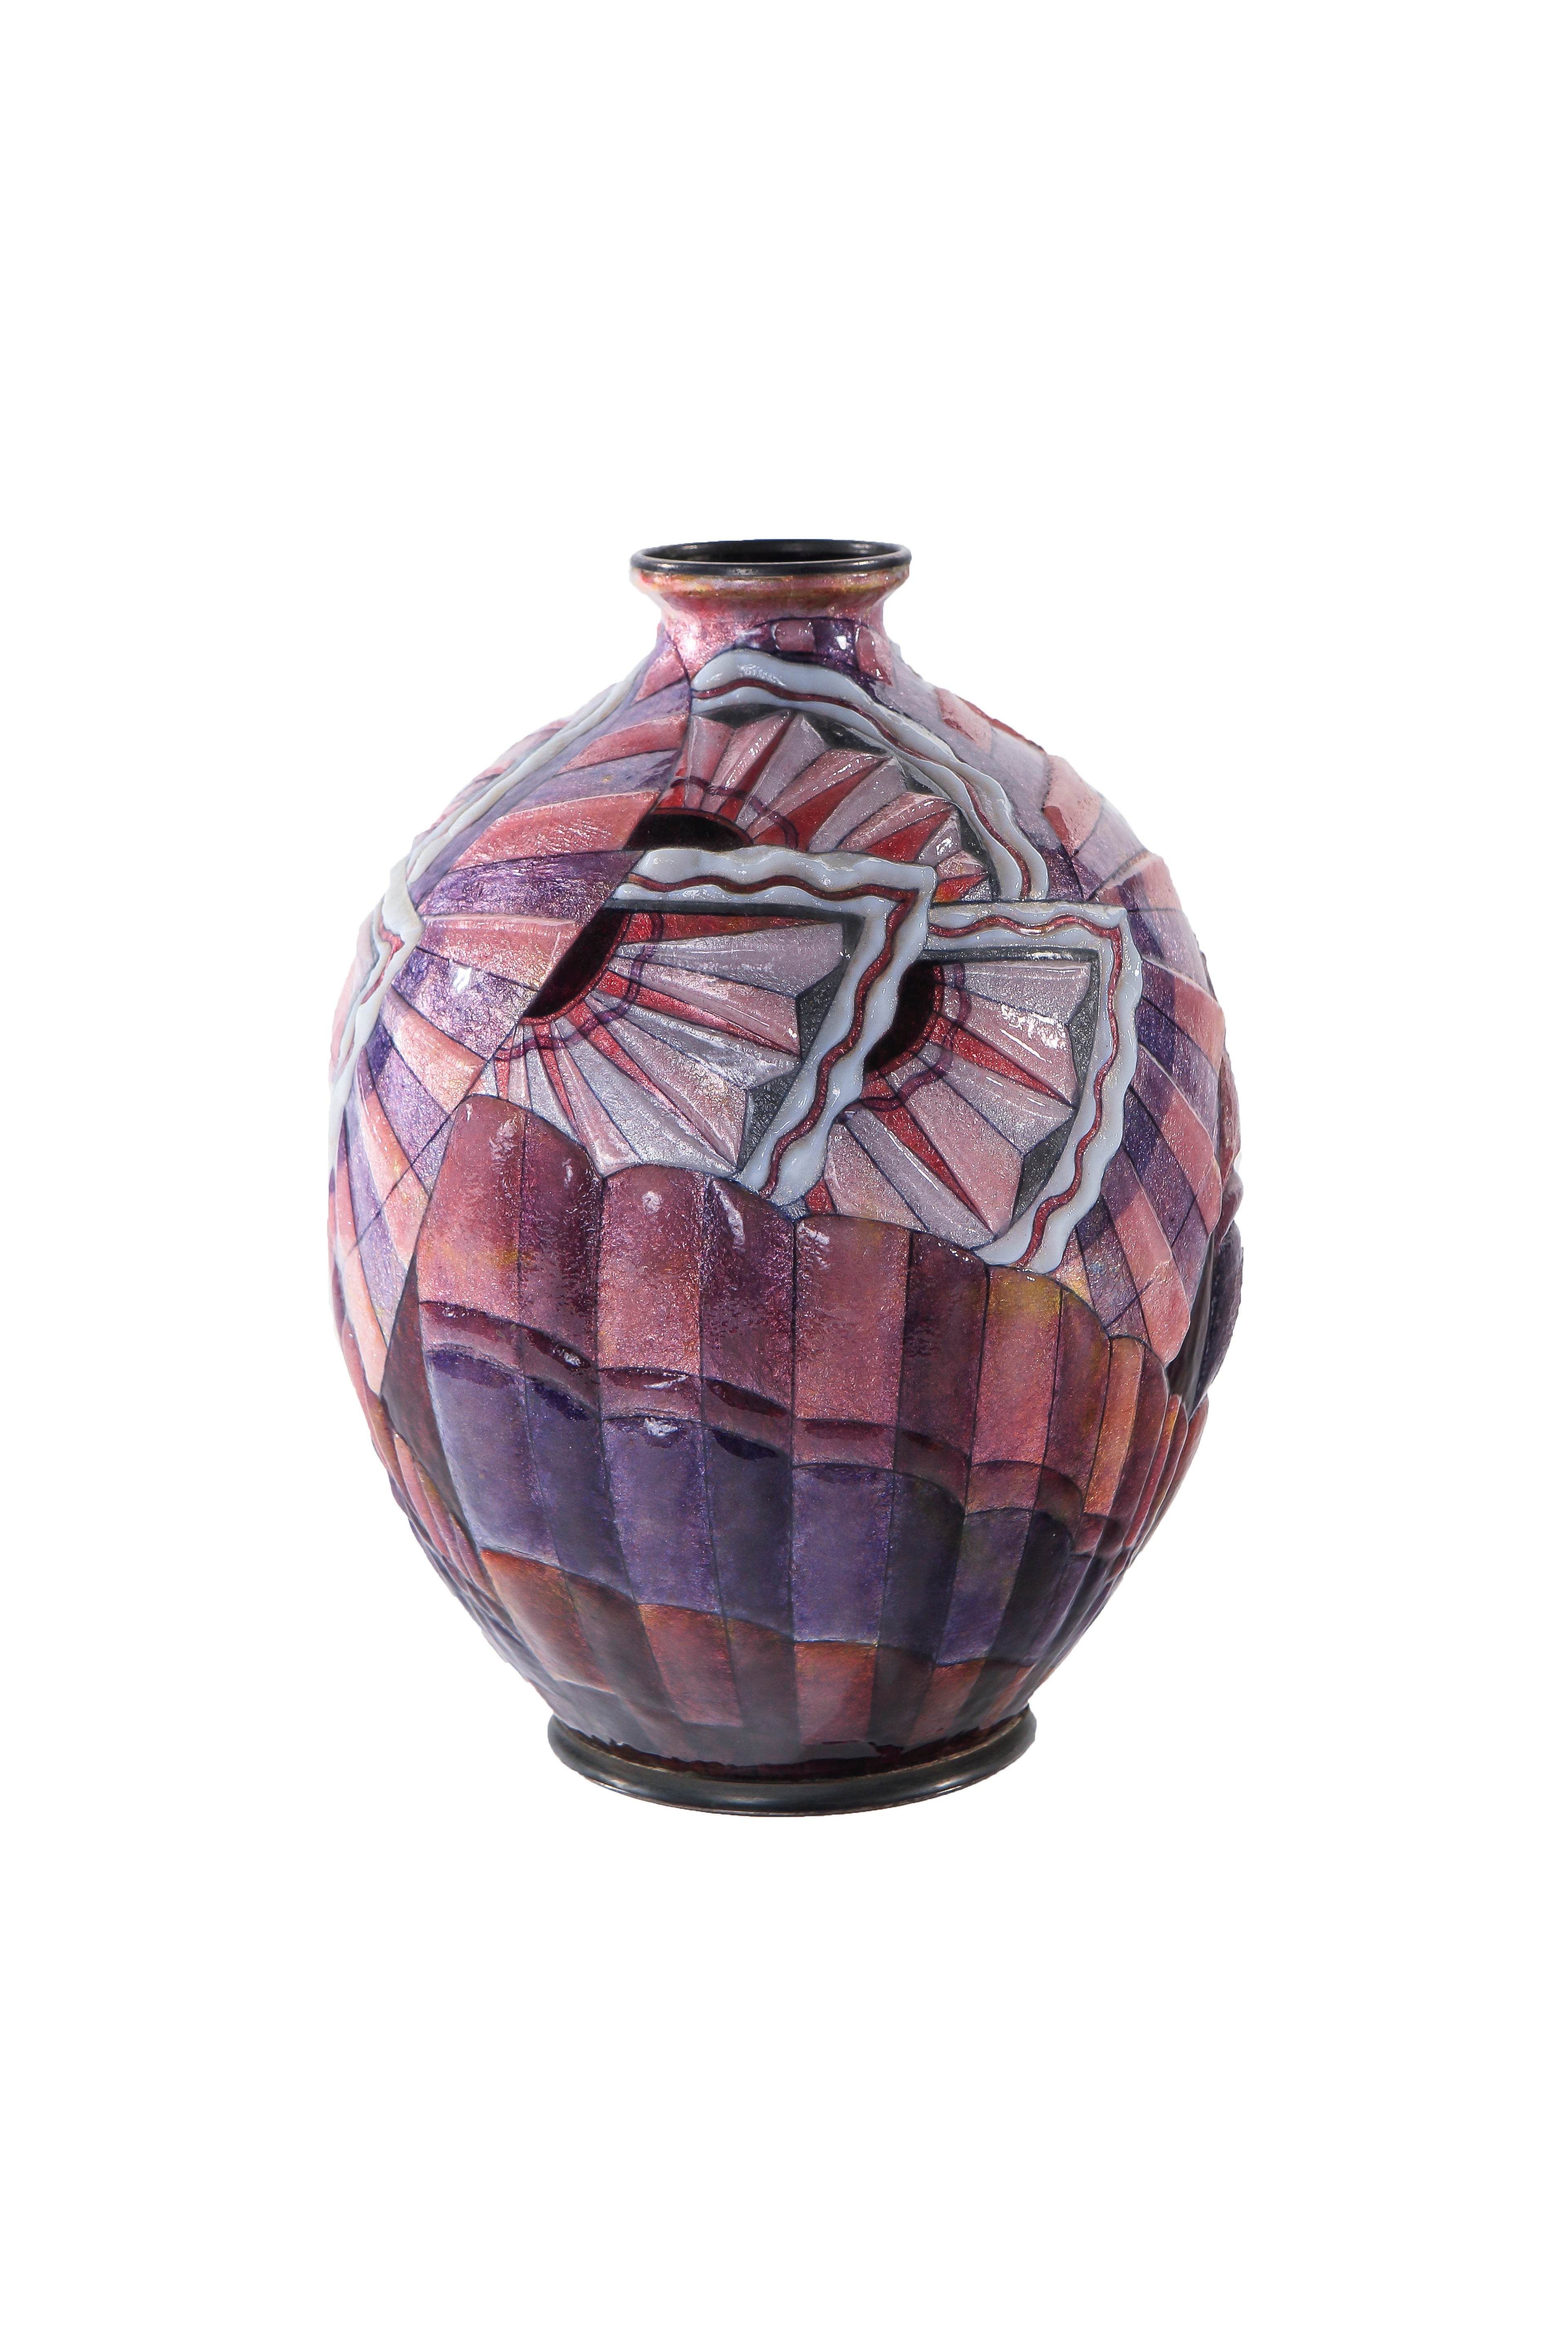 French Art Deco "Geometric" Enameled Vase by, Camille Fauré